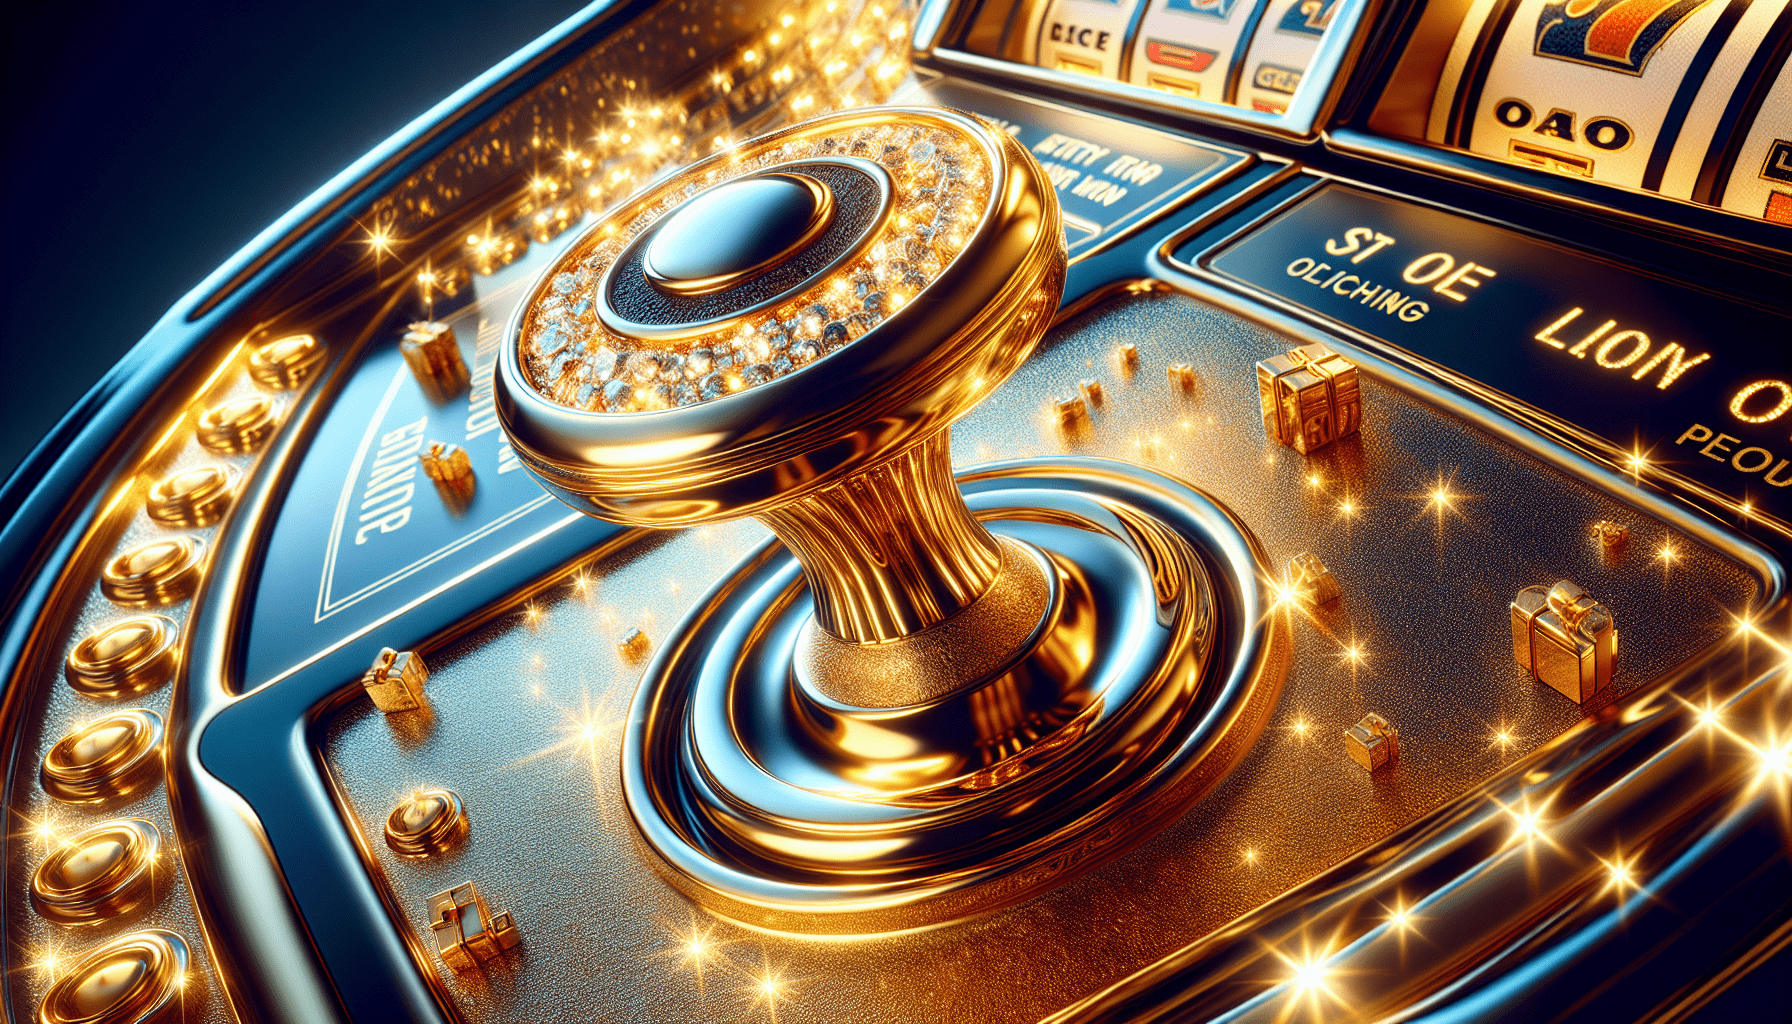 What Is The Highest Paying Slot Machine Online?